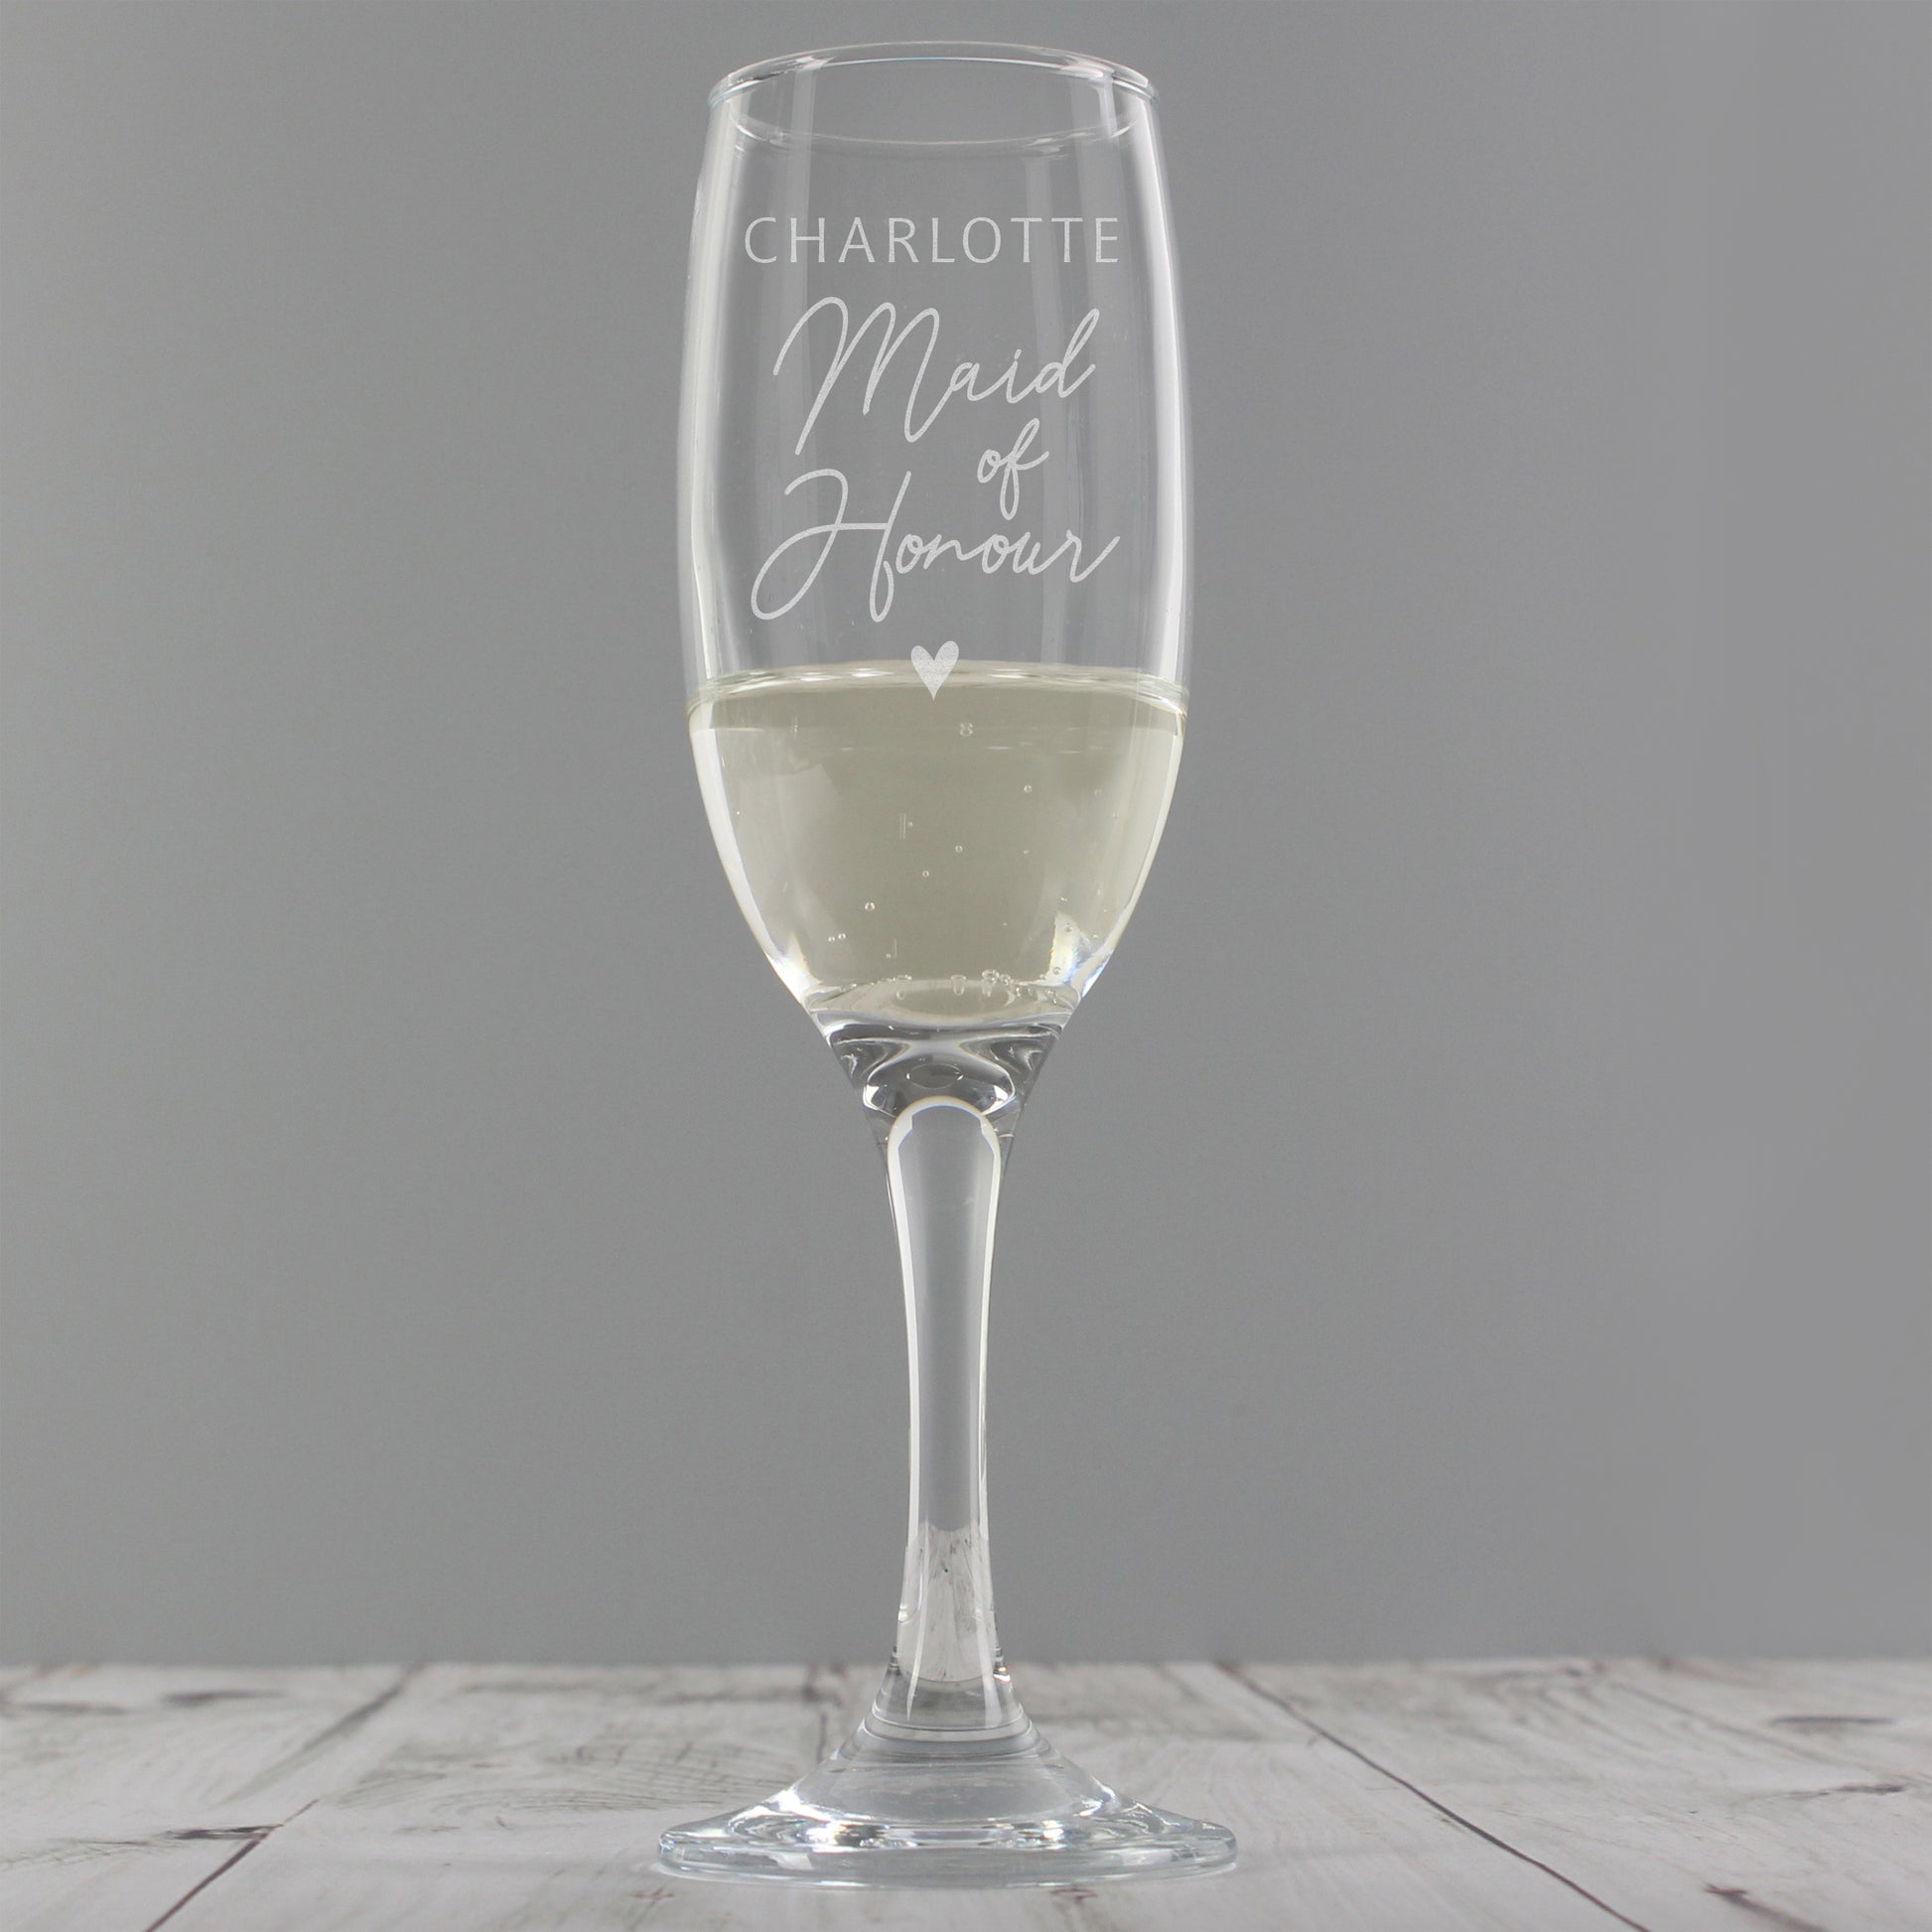 Personalised Flute Glass - Maid Of Honour - Violet Belle Gifts - Personalised Flute Glass - Maid Of Honour